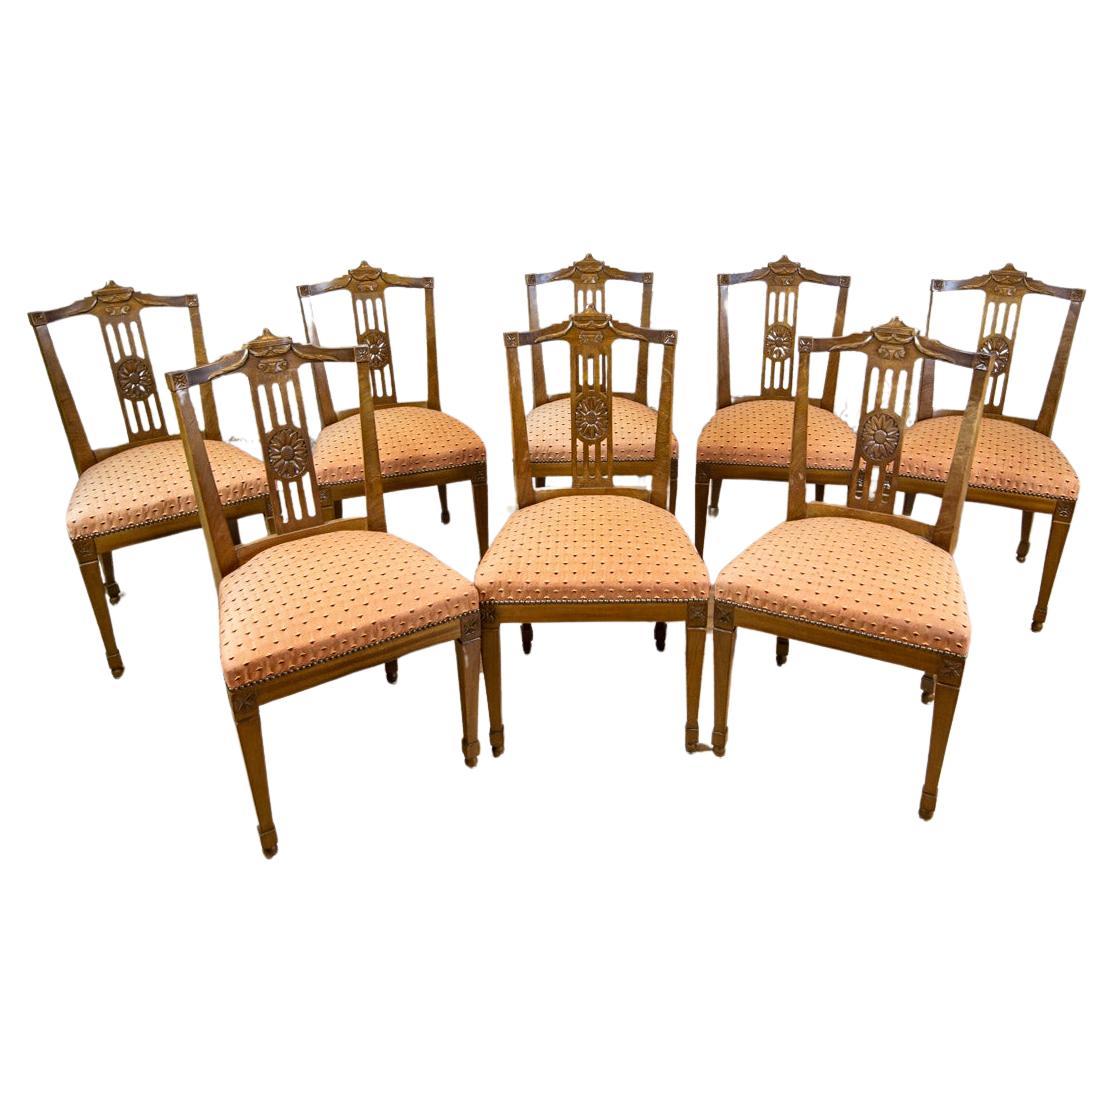 Set of Eight Empire Ash Chairs From the Late 19th Century